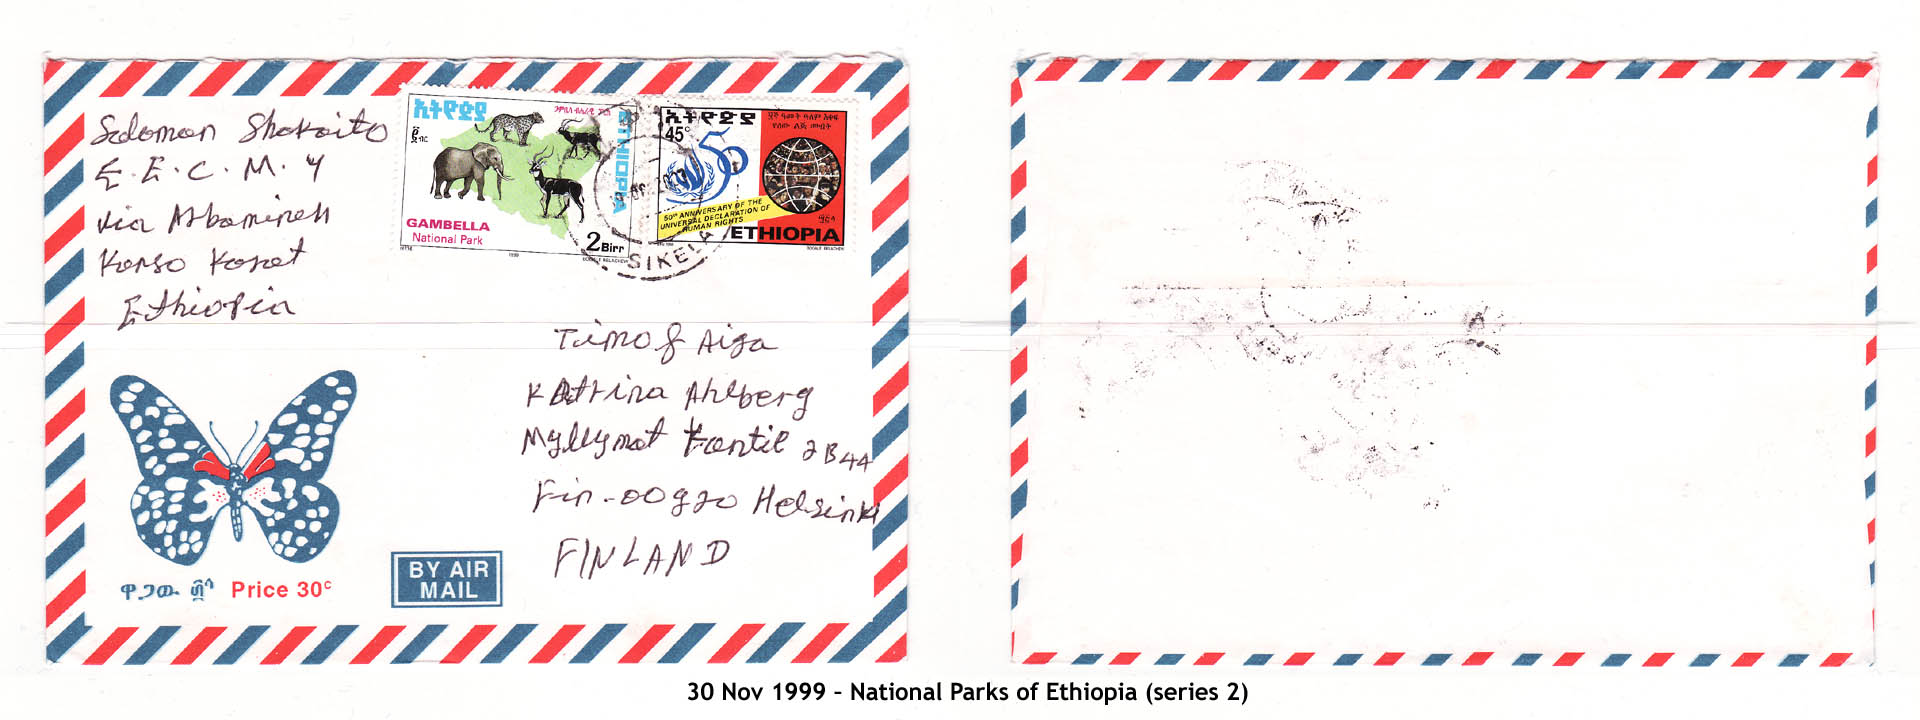 19991130 – National Parks of Ethiopia (series 2)